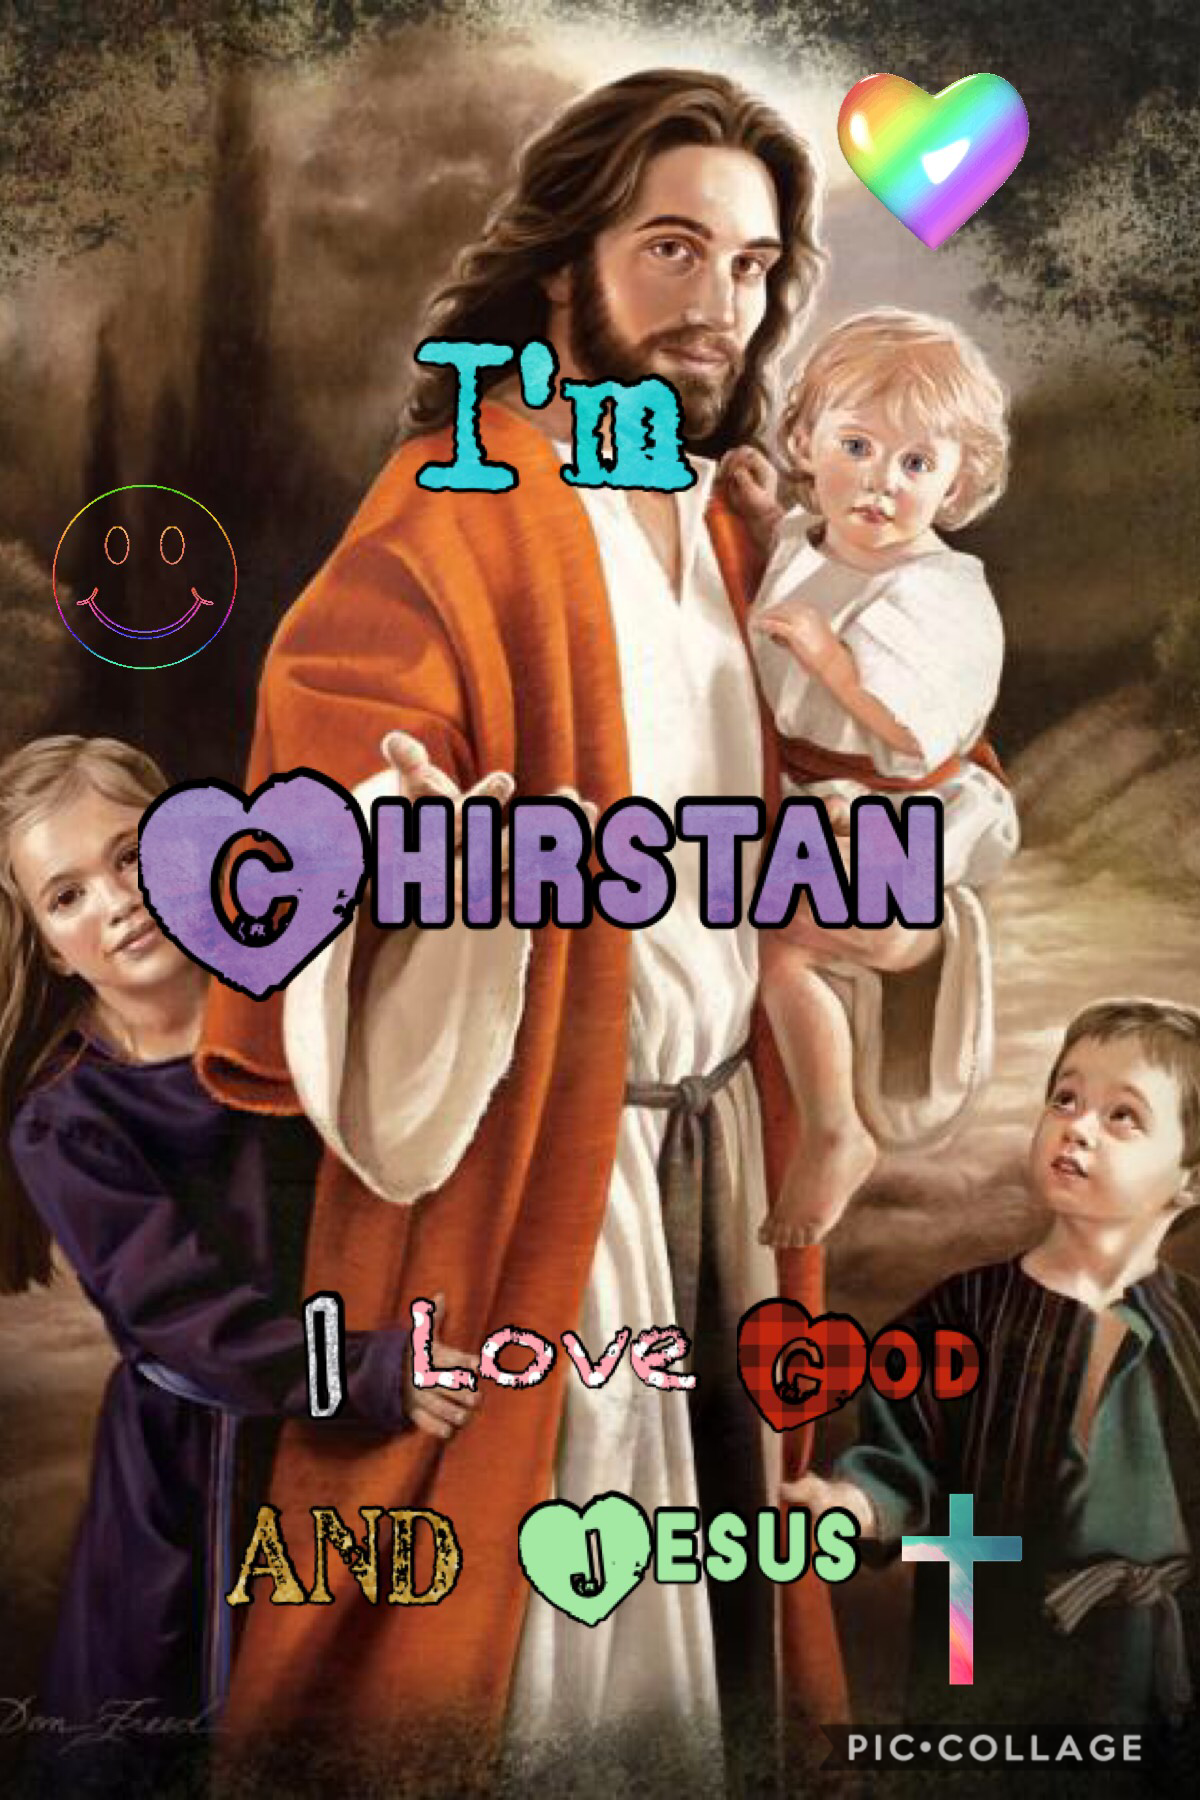 I will always and forever ♾ love 💜 god and Jesus and be a Christen ✝️💒